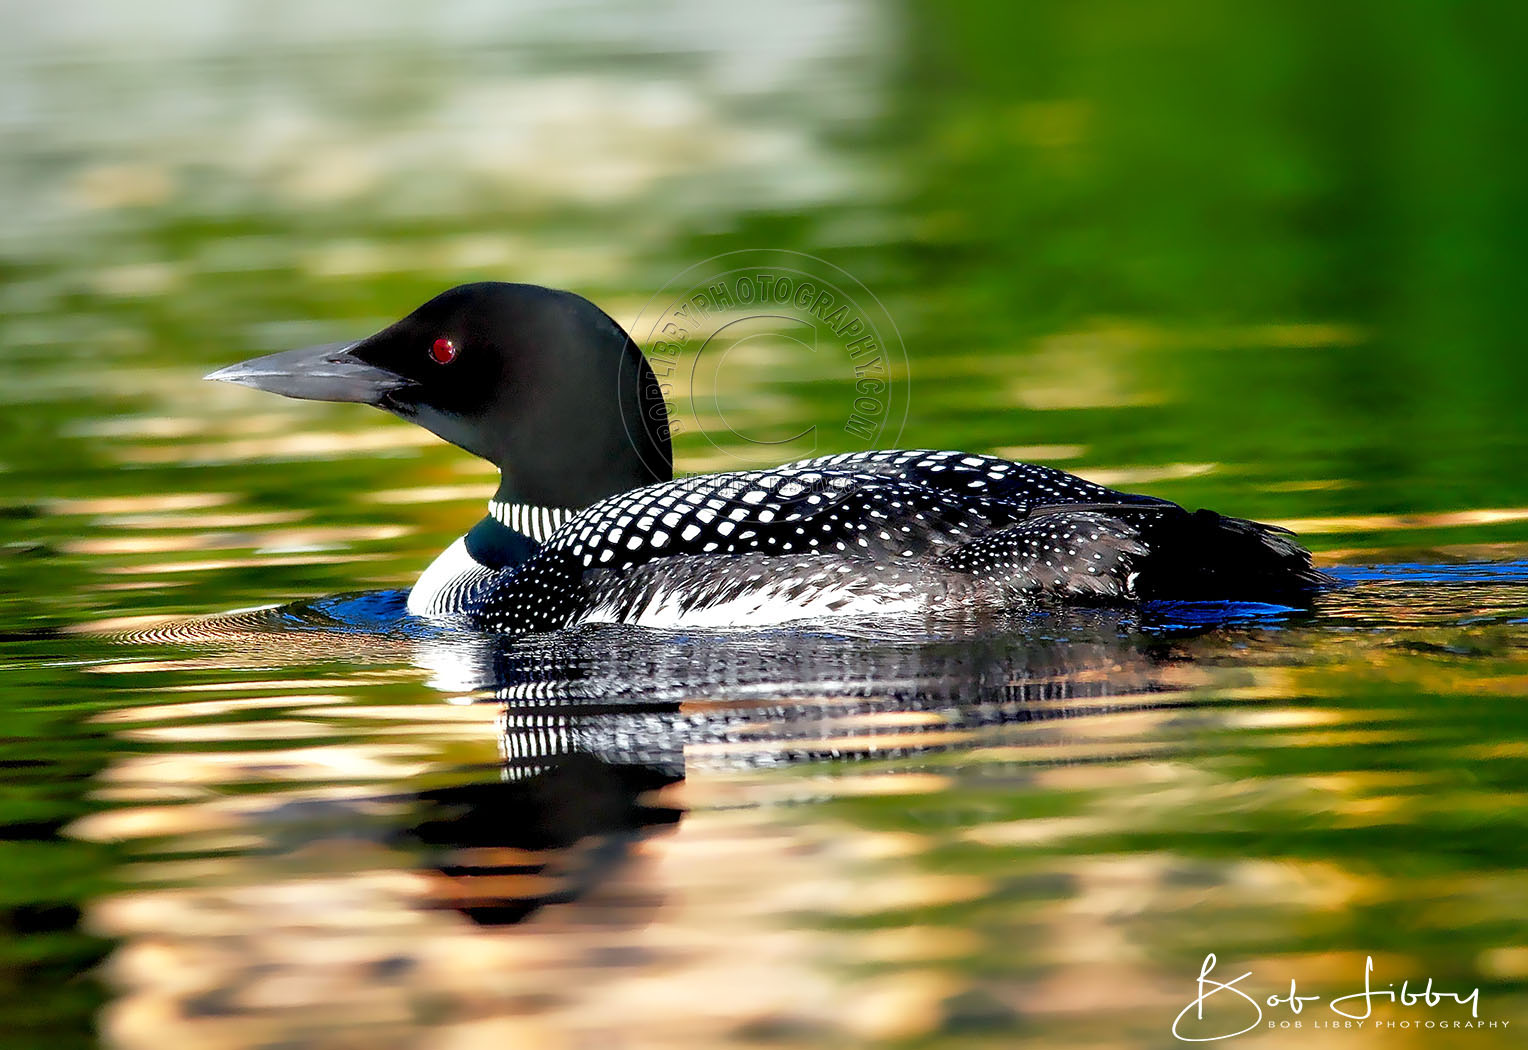 West Branch... Maine Loon